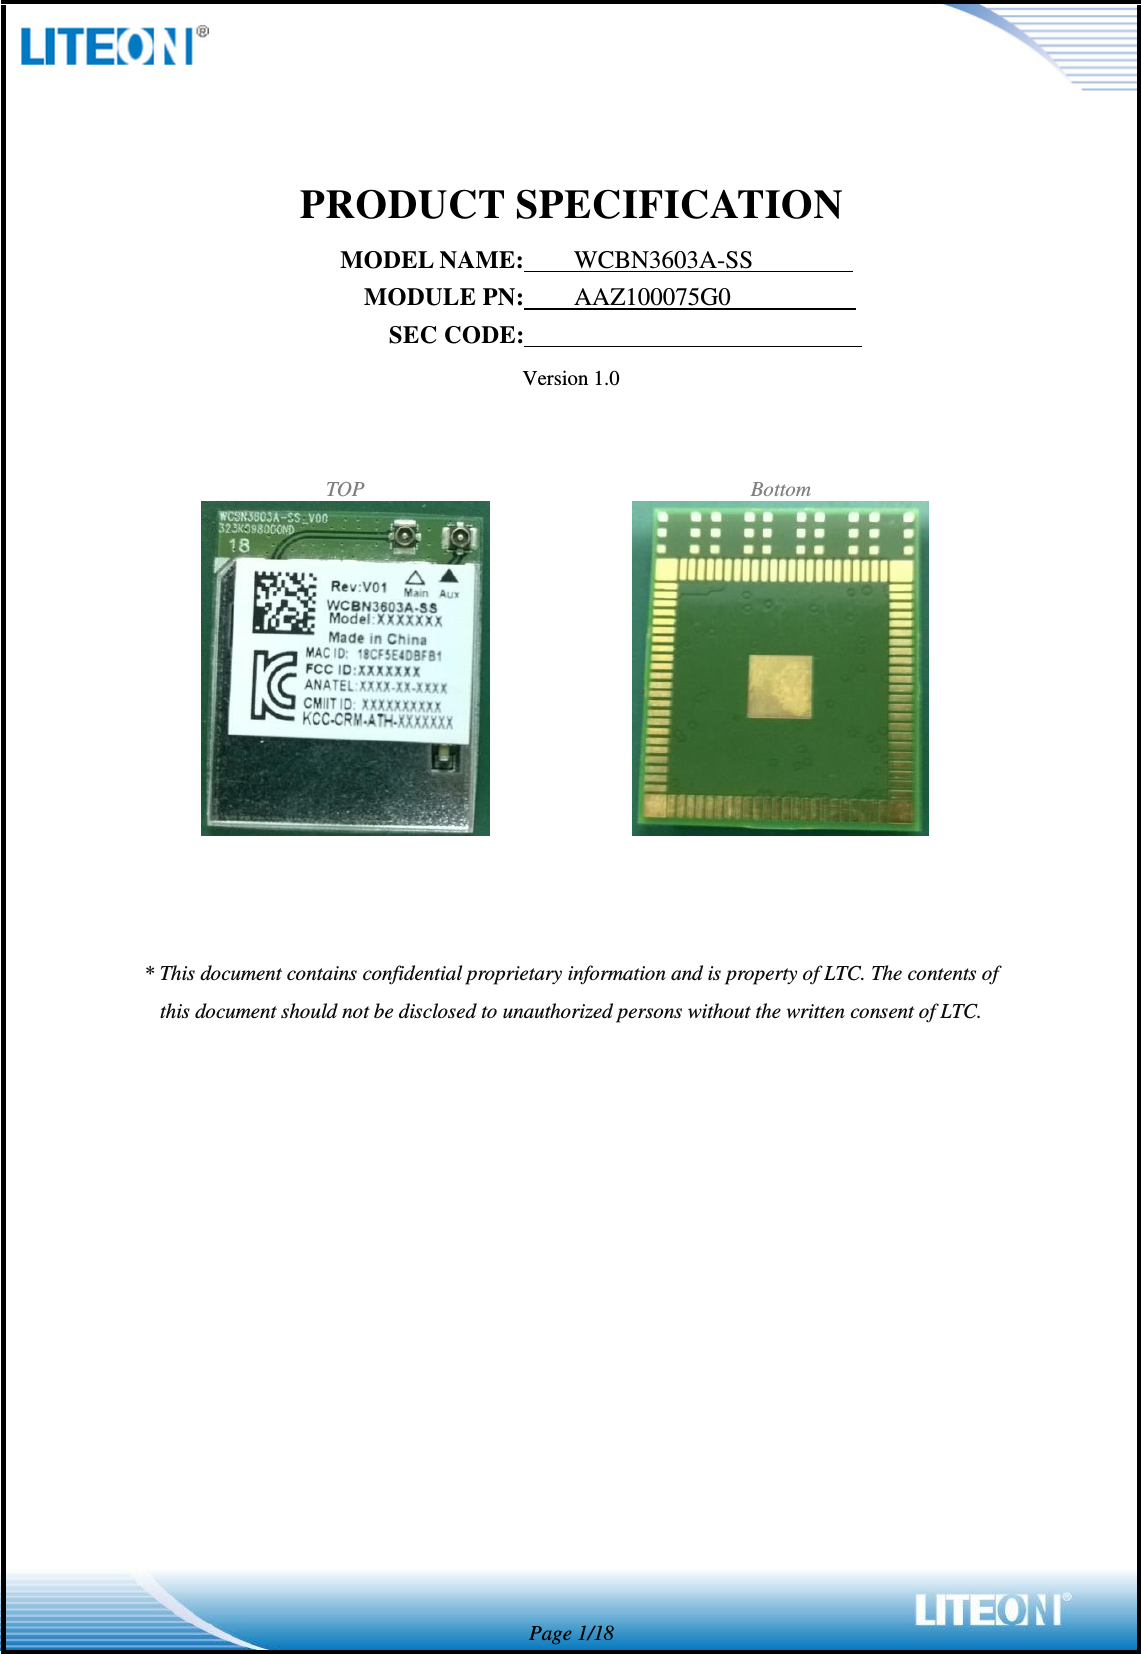  Page 1/18  PRODUCT SPECIFICATION MODEL NAME:    WCBN3603A-SS         MODULE PN:    AAZ100075G0           SEC CODE:                            Version 1.0   TOP Bottom      * This document contains confidential proprietary information and is property of LTC. The contents of this document should not be disclosed to unauthorized persons without the written consent of LTC.              